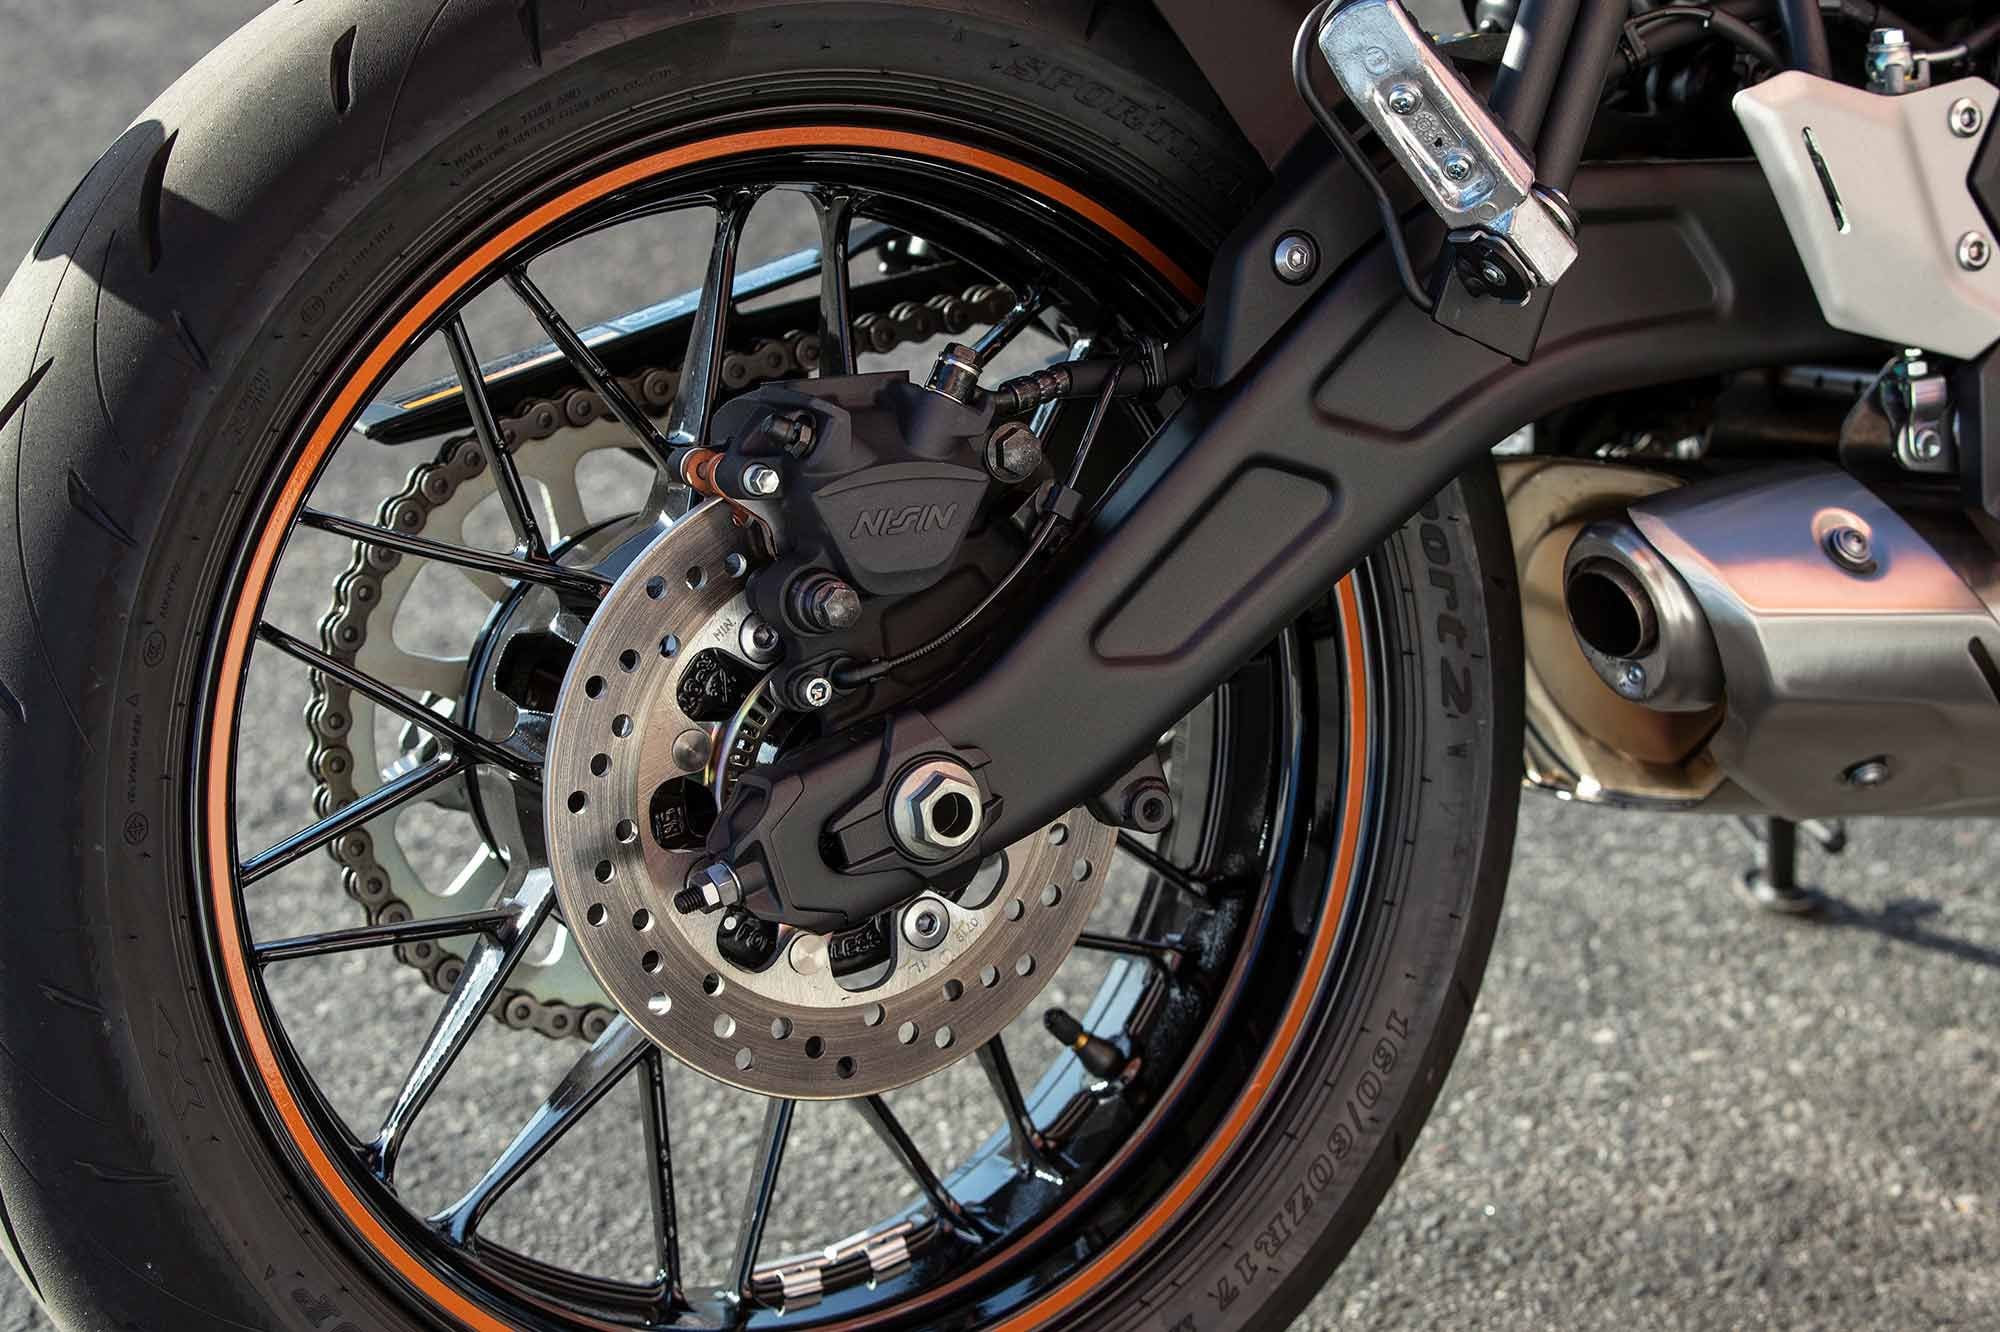 A gull-wing-type swingarm connects to a direct mount shock that strikes a balance between comfort and road-holding. The 17-inch cast wheels with spokelike design are shod with Dunlop Sportmax Roadsport 2 rubber.